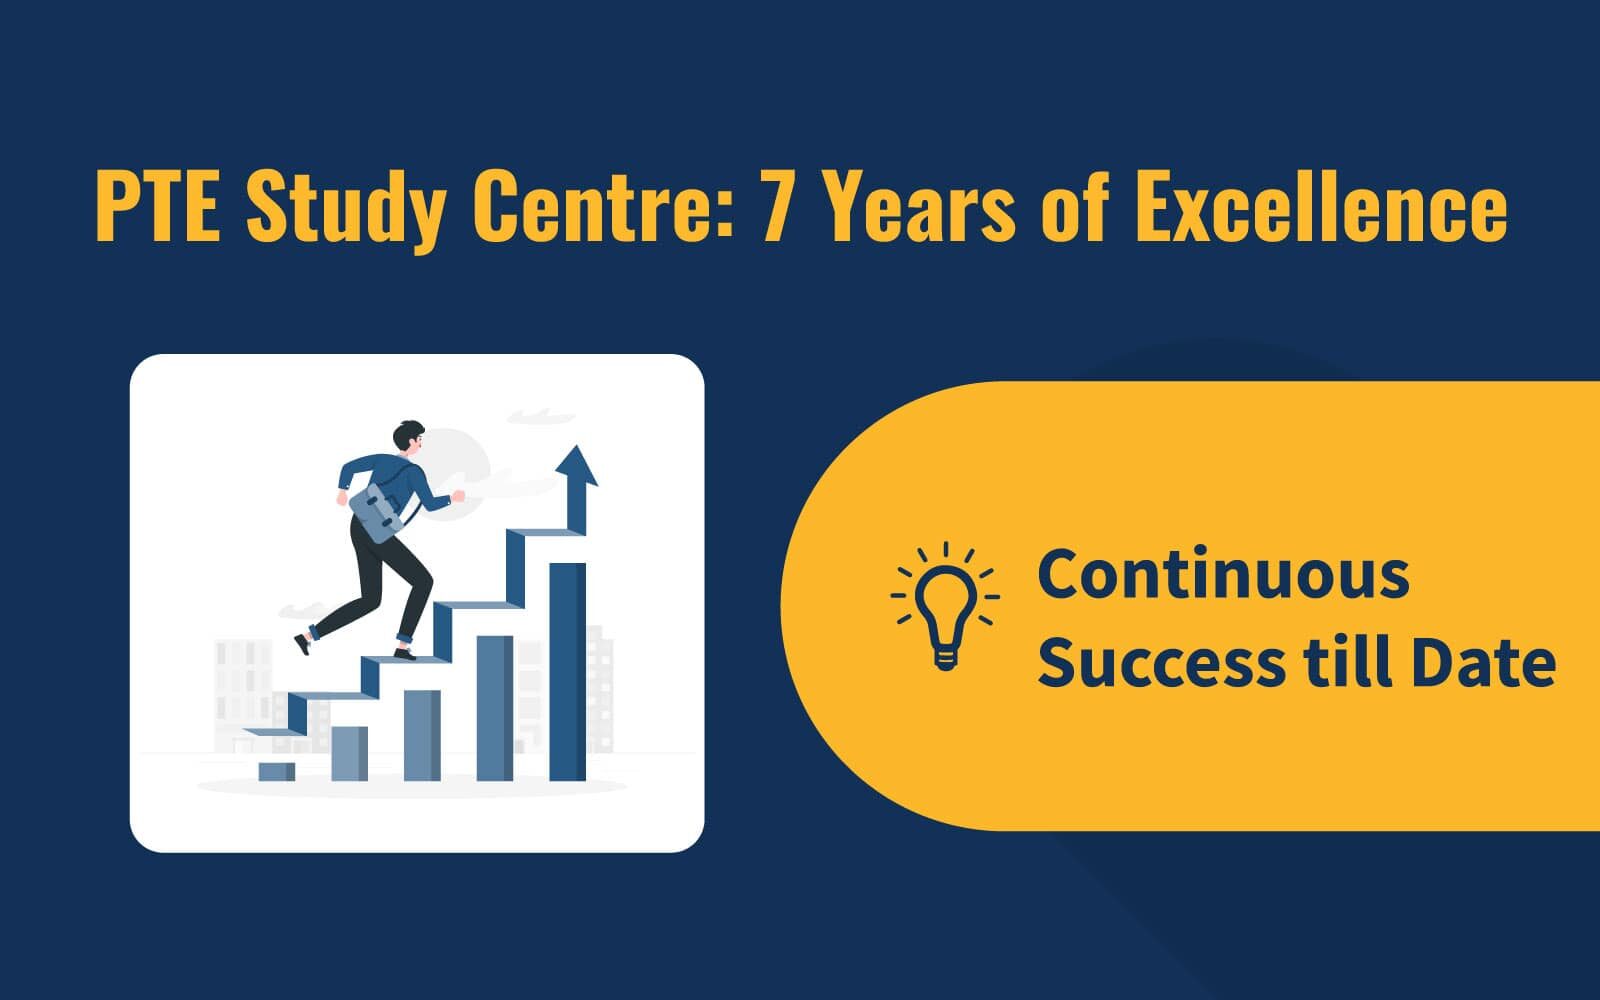 PTE Study Centre: 7 Years of Excellence image